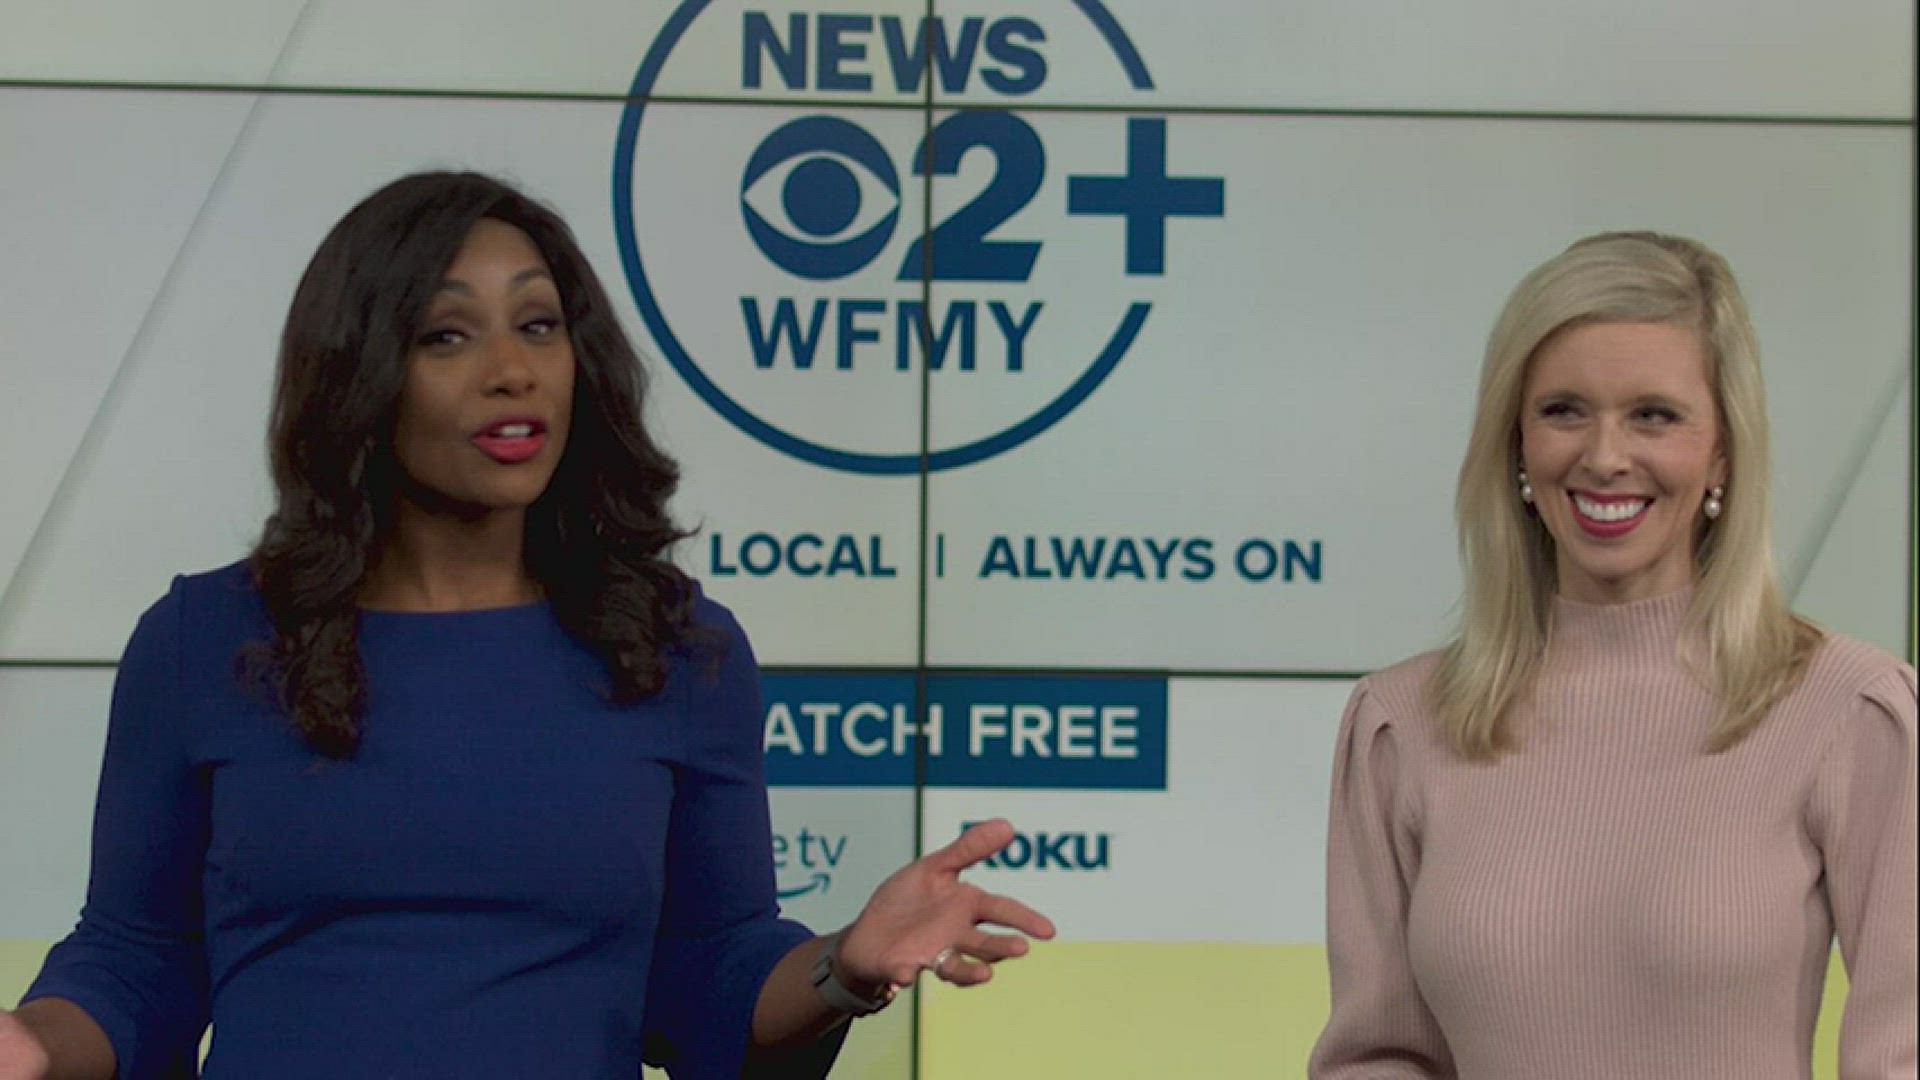 Watch The Good Morning Show on your own time with the WFMY+ streaming app for Roku and Fire TV.